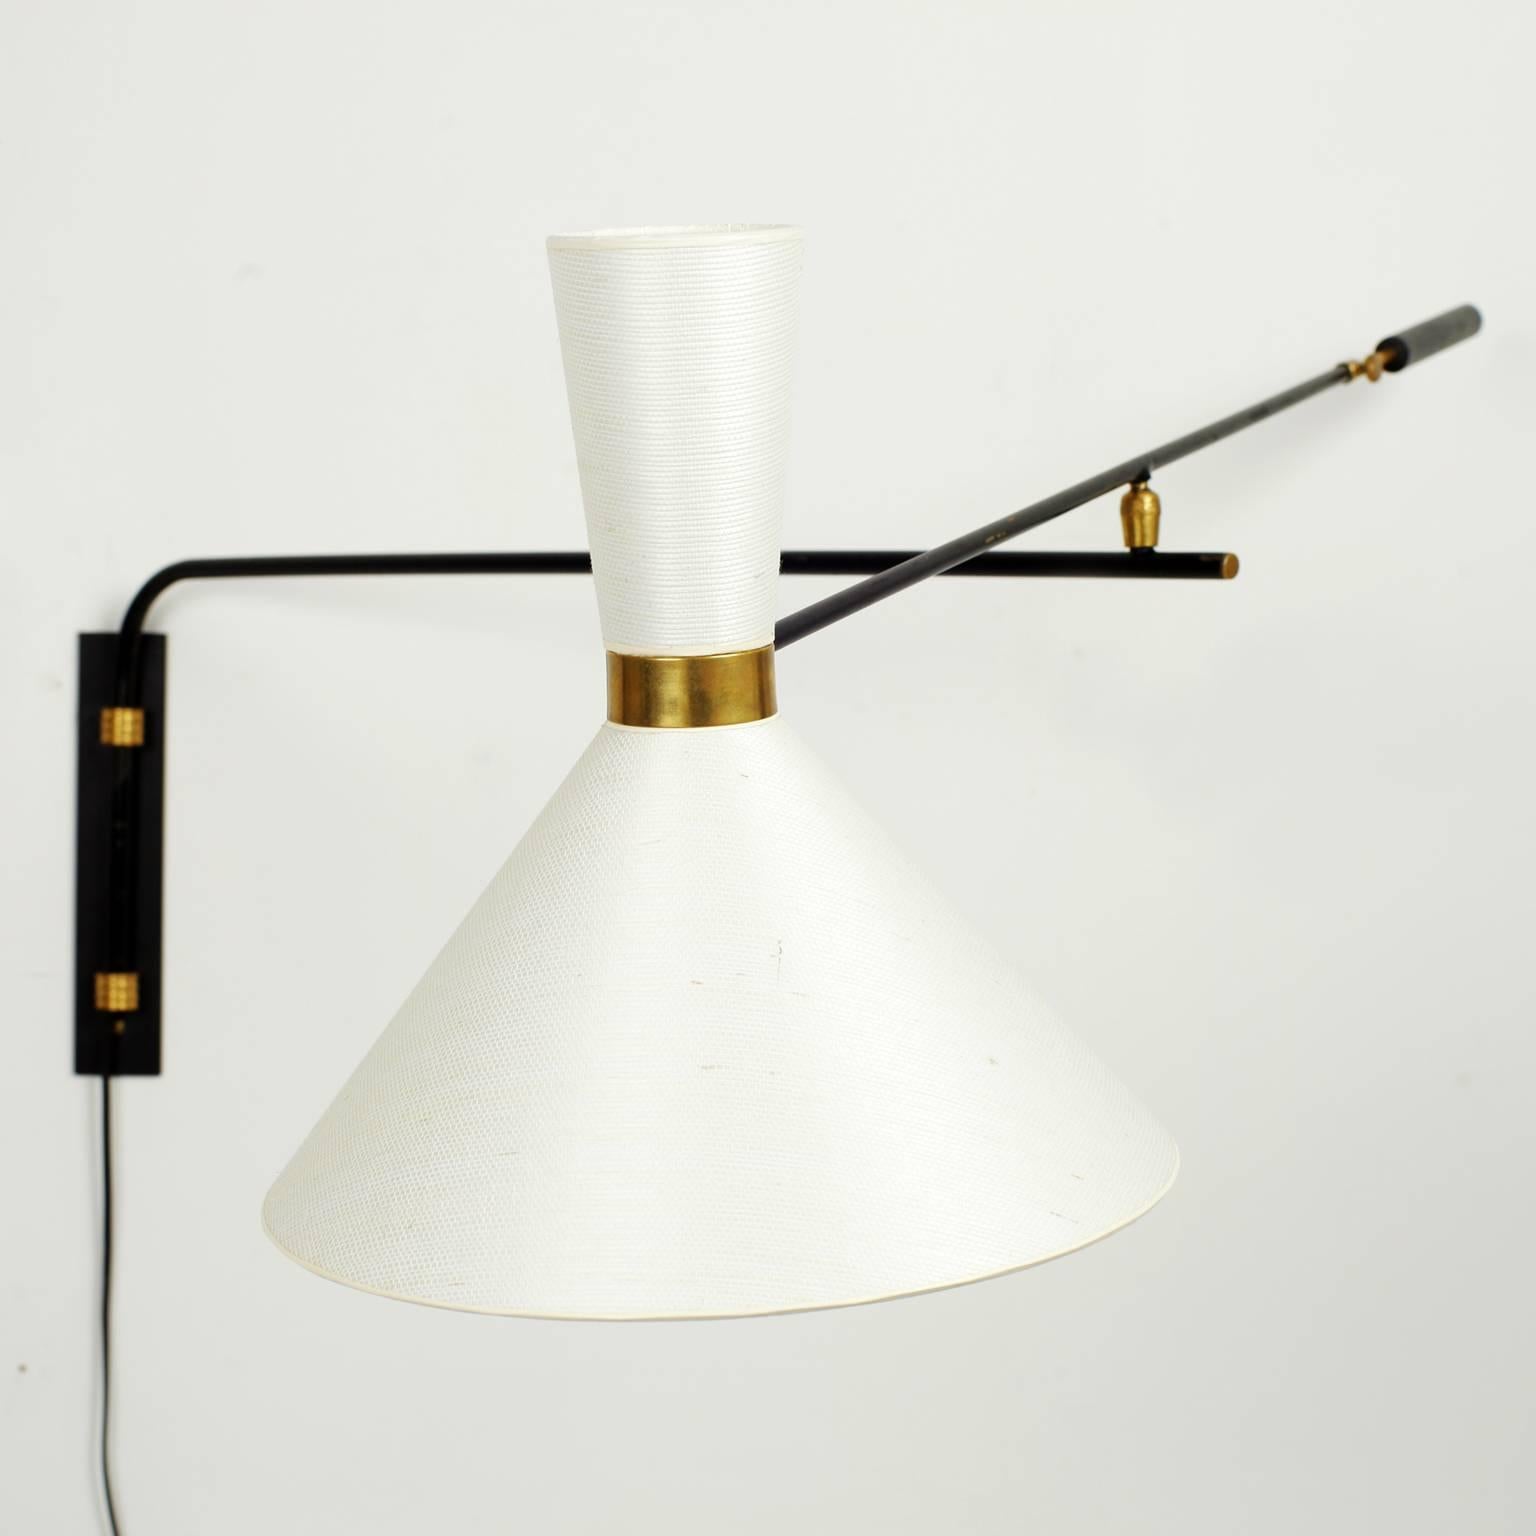 Brass French Counter Balance and Swing Arm Wall Lamp, 1950